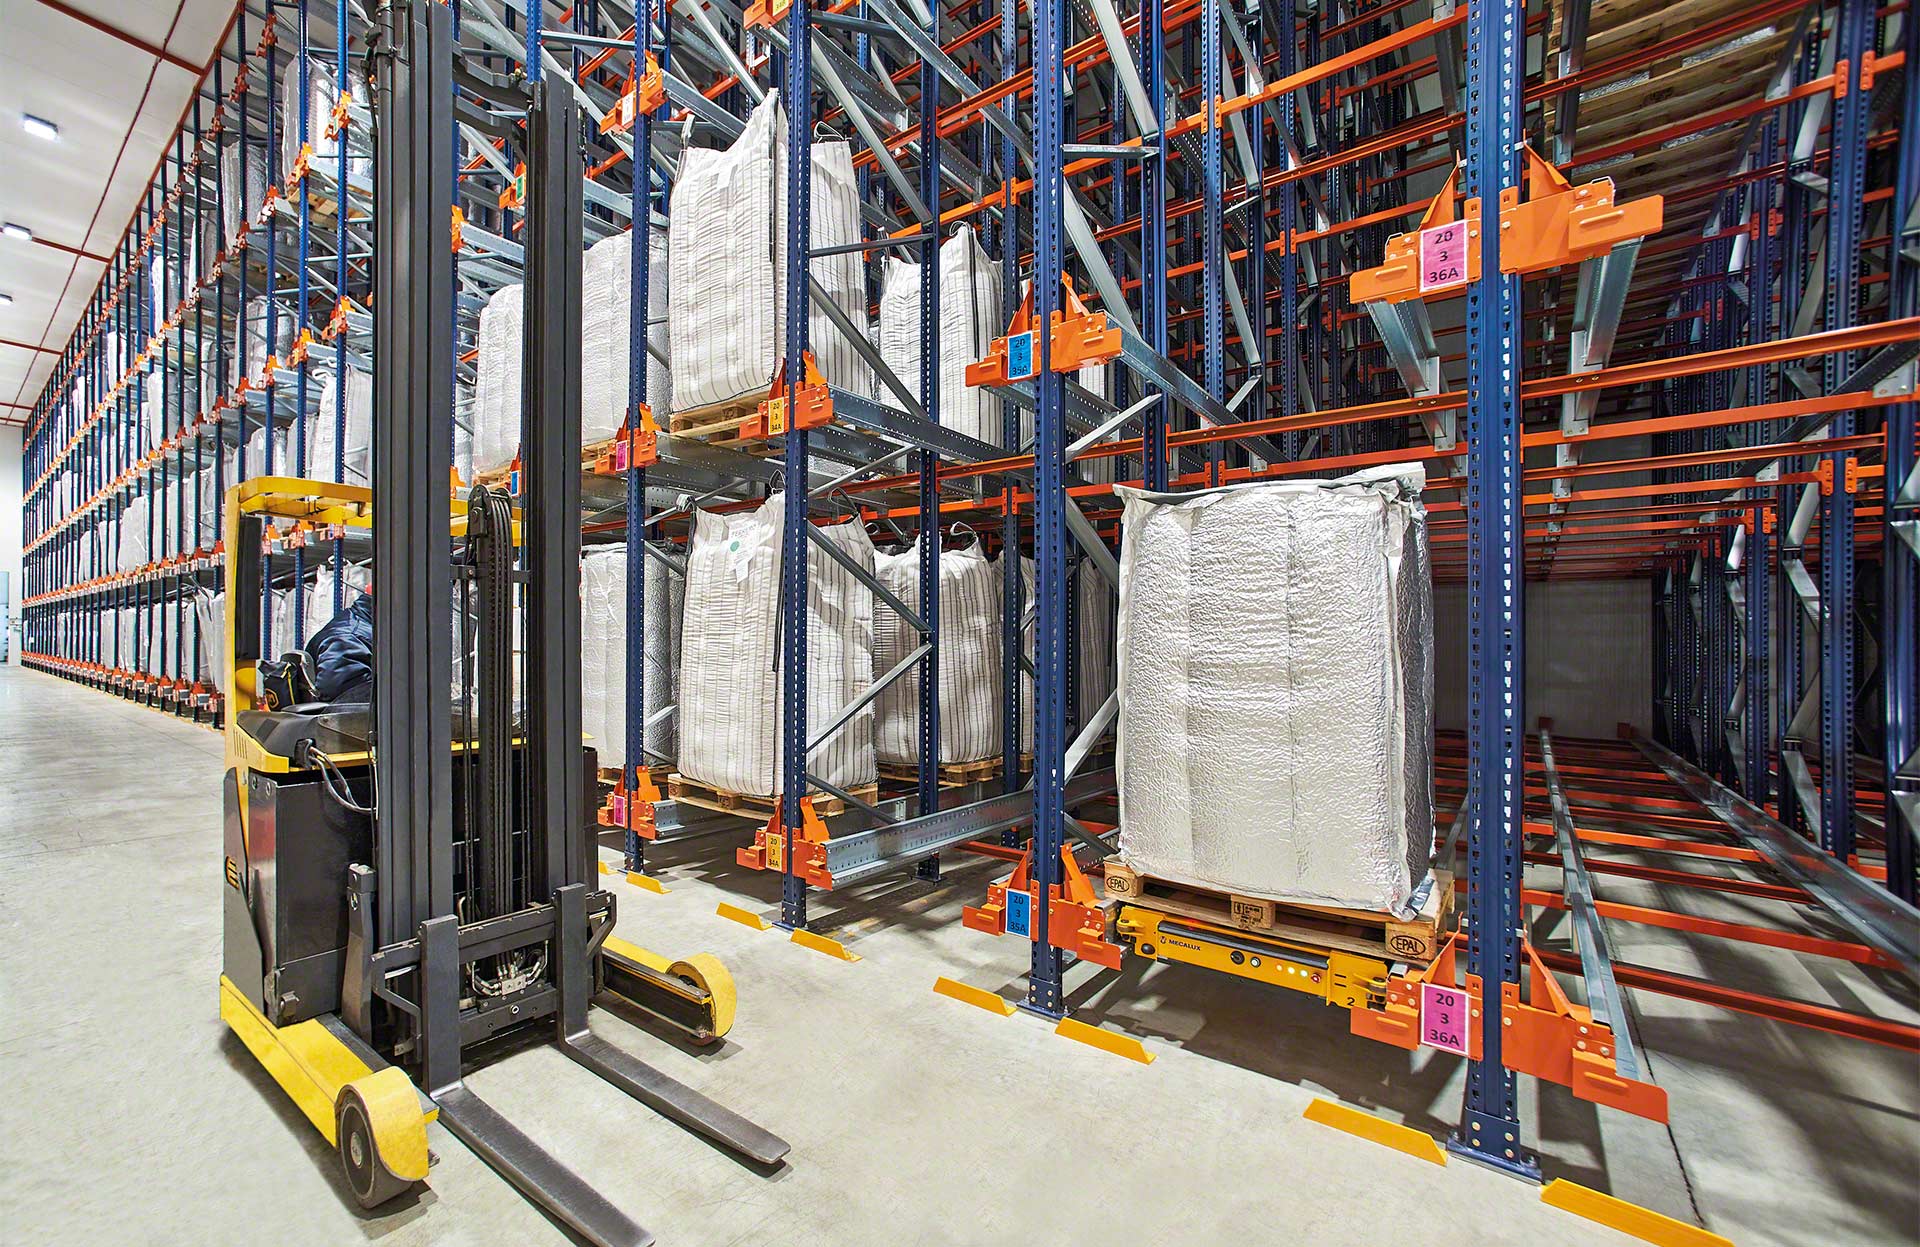 A Pallet Shuttle racking system allows for the storage of big bags